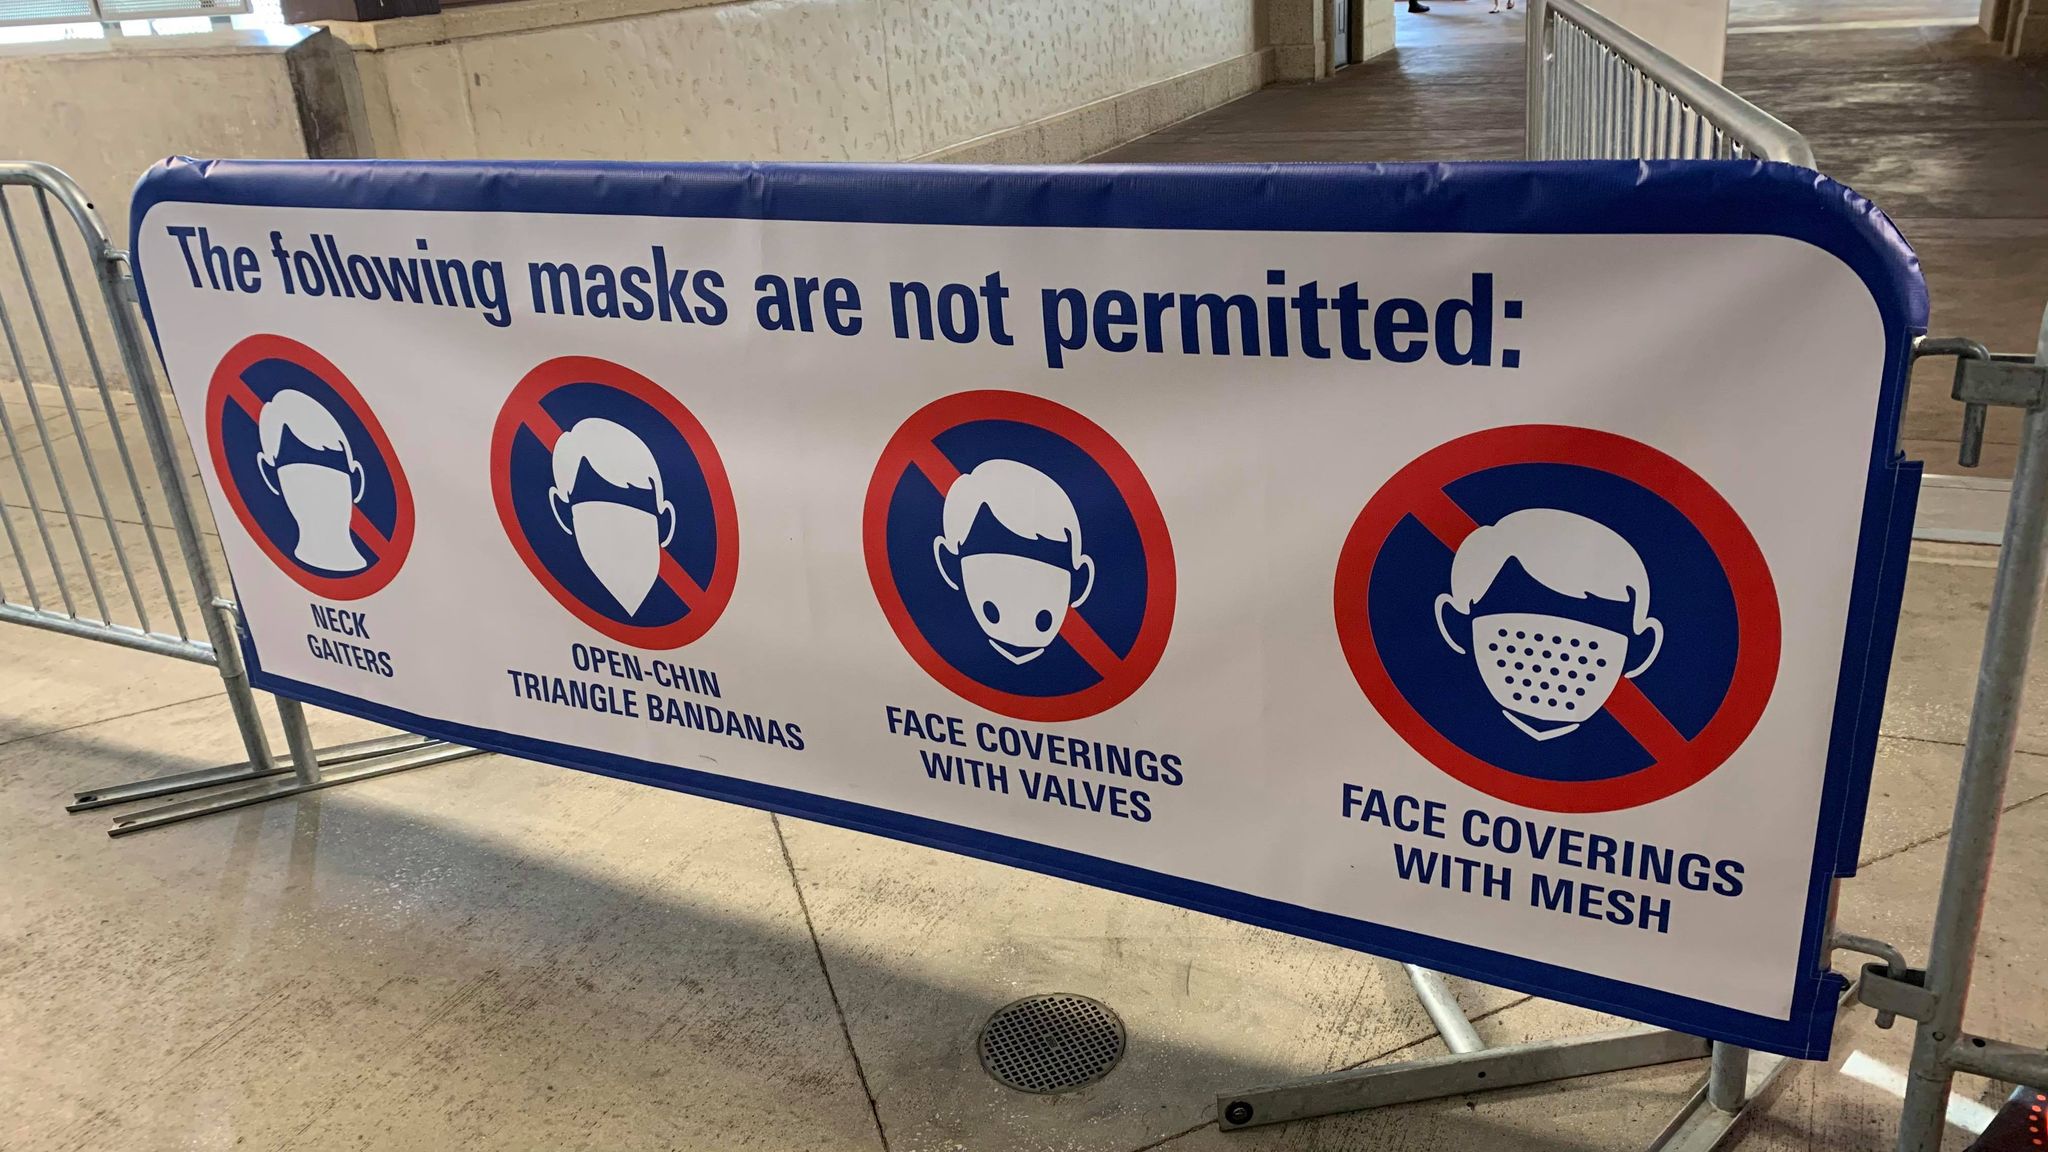 New sign shows which masks not permitted at Disney Springs